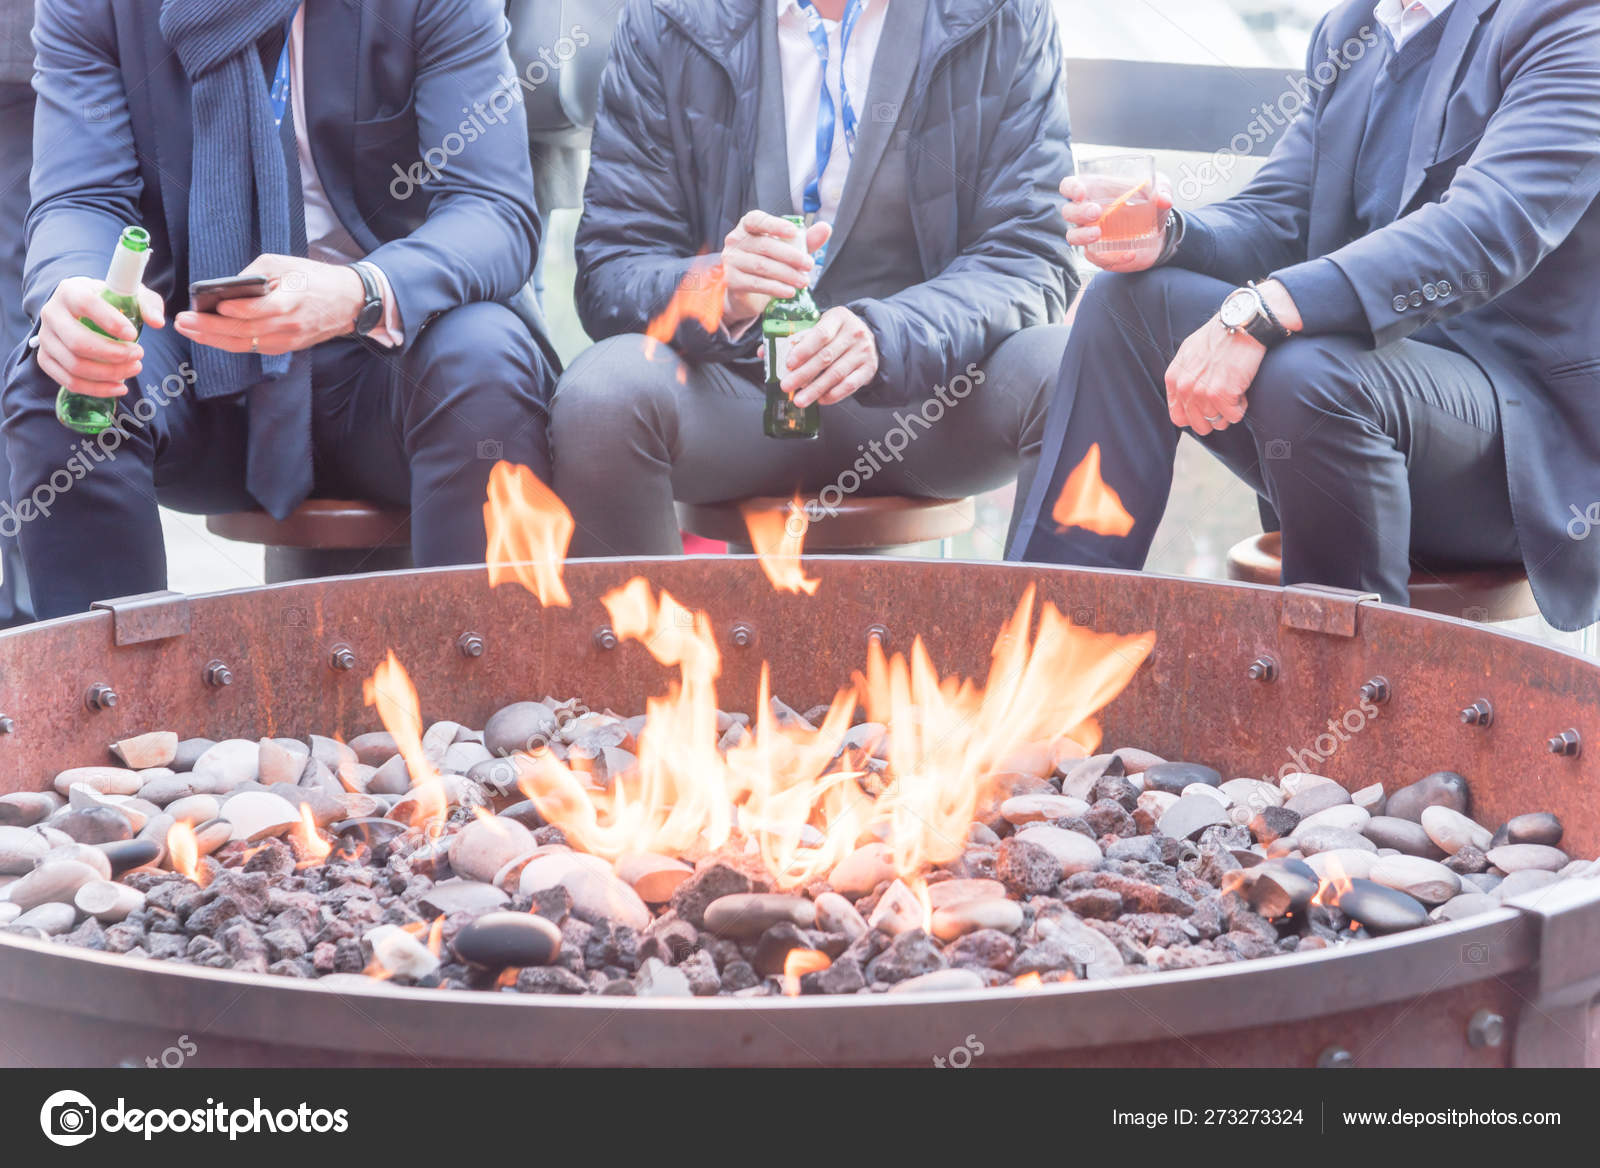 Businesspeople Hangout Near Patio Fire, Chicago Fire Pit